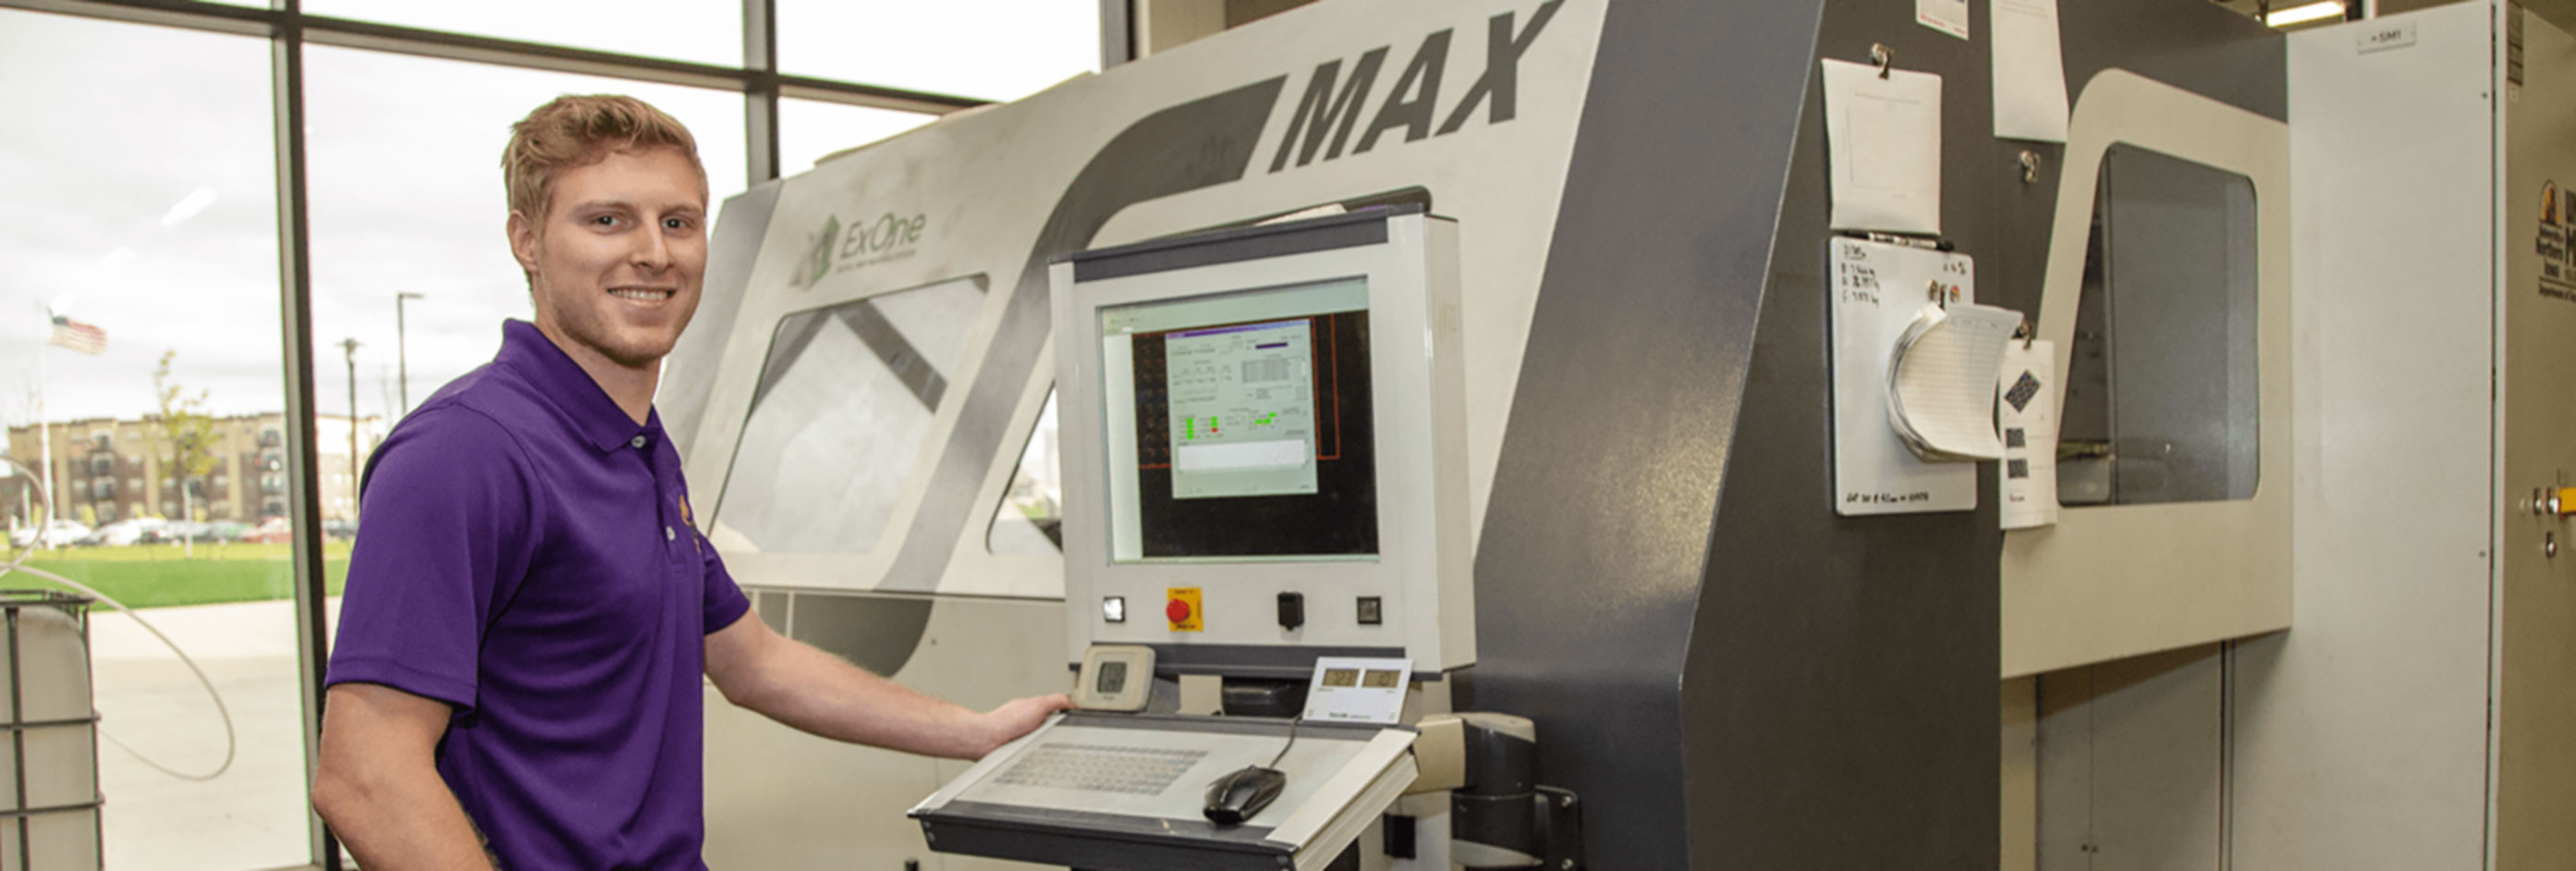 Student standing next to a MAX machine.